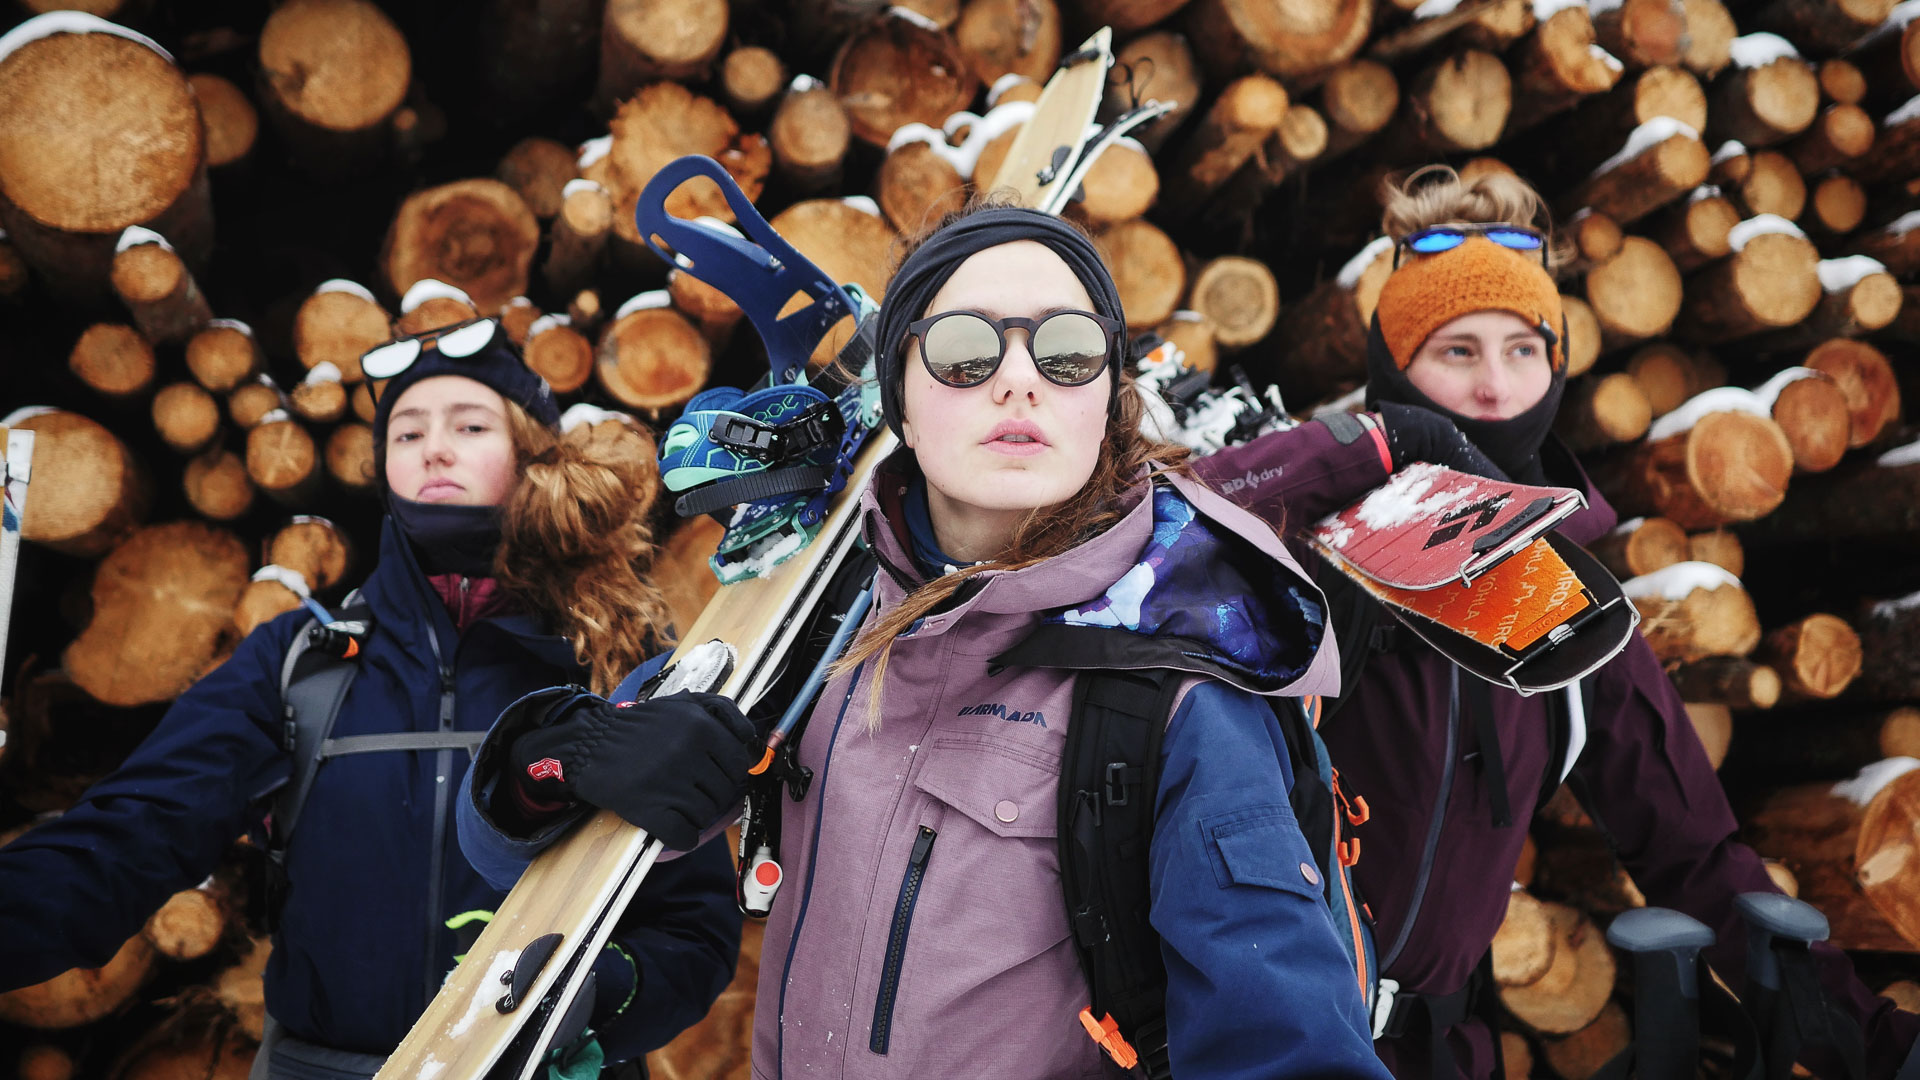 Three snowboarder girls are ready for a ski tour with their splitboards and skis.